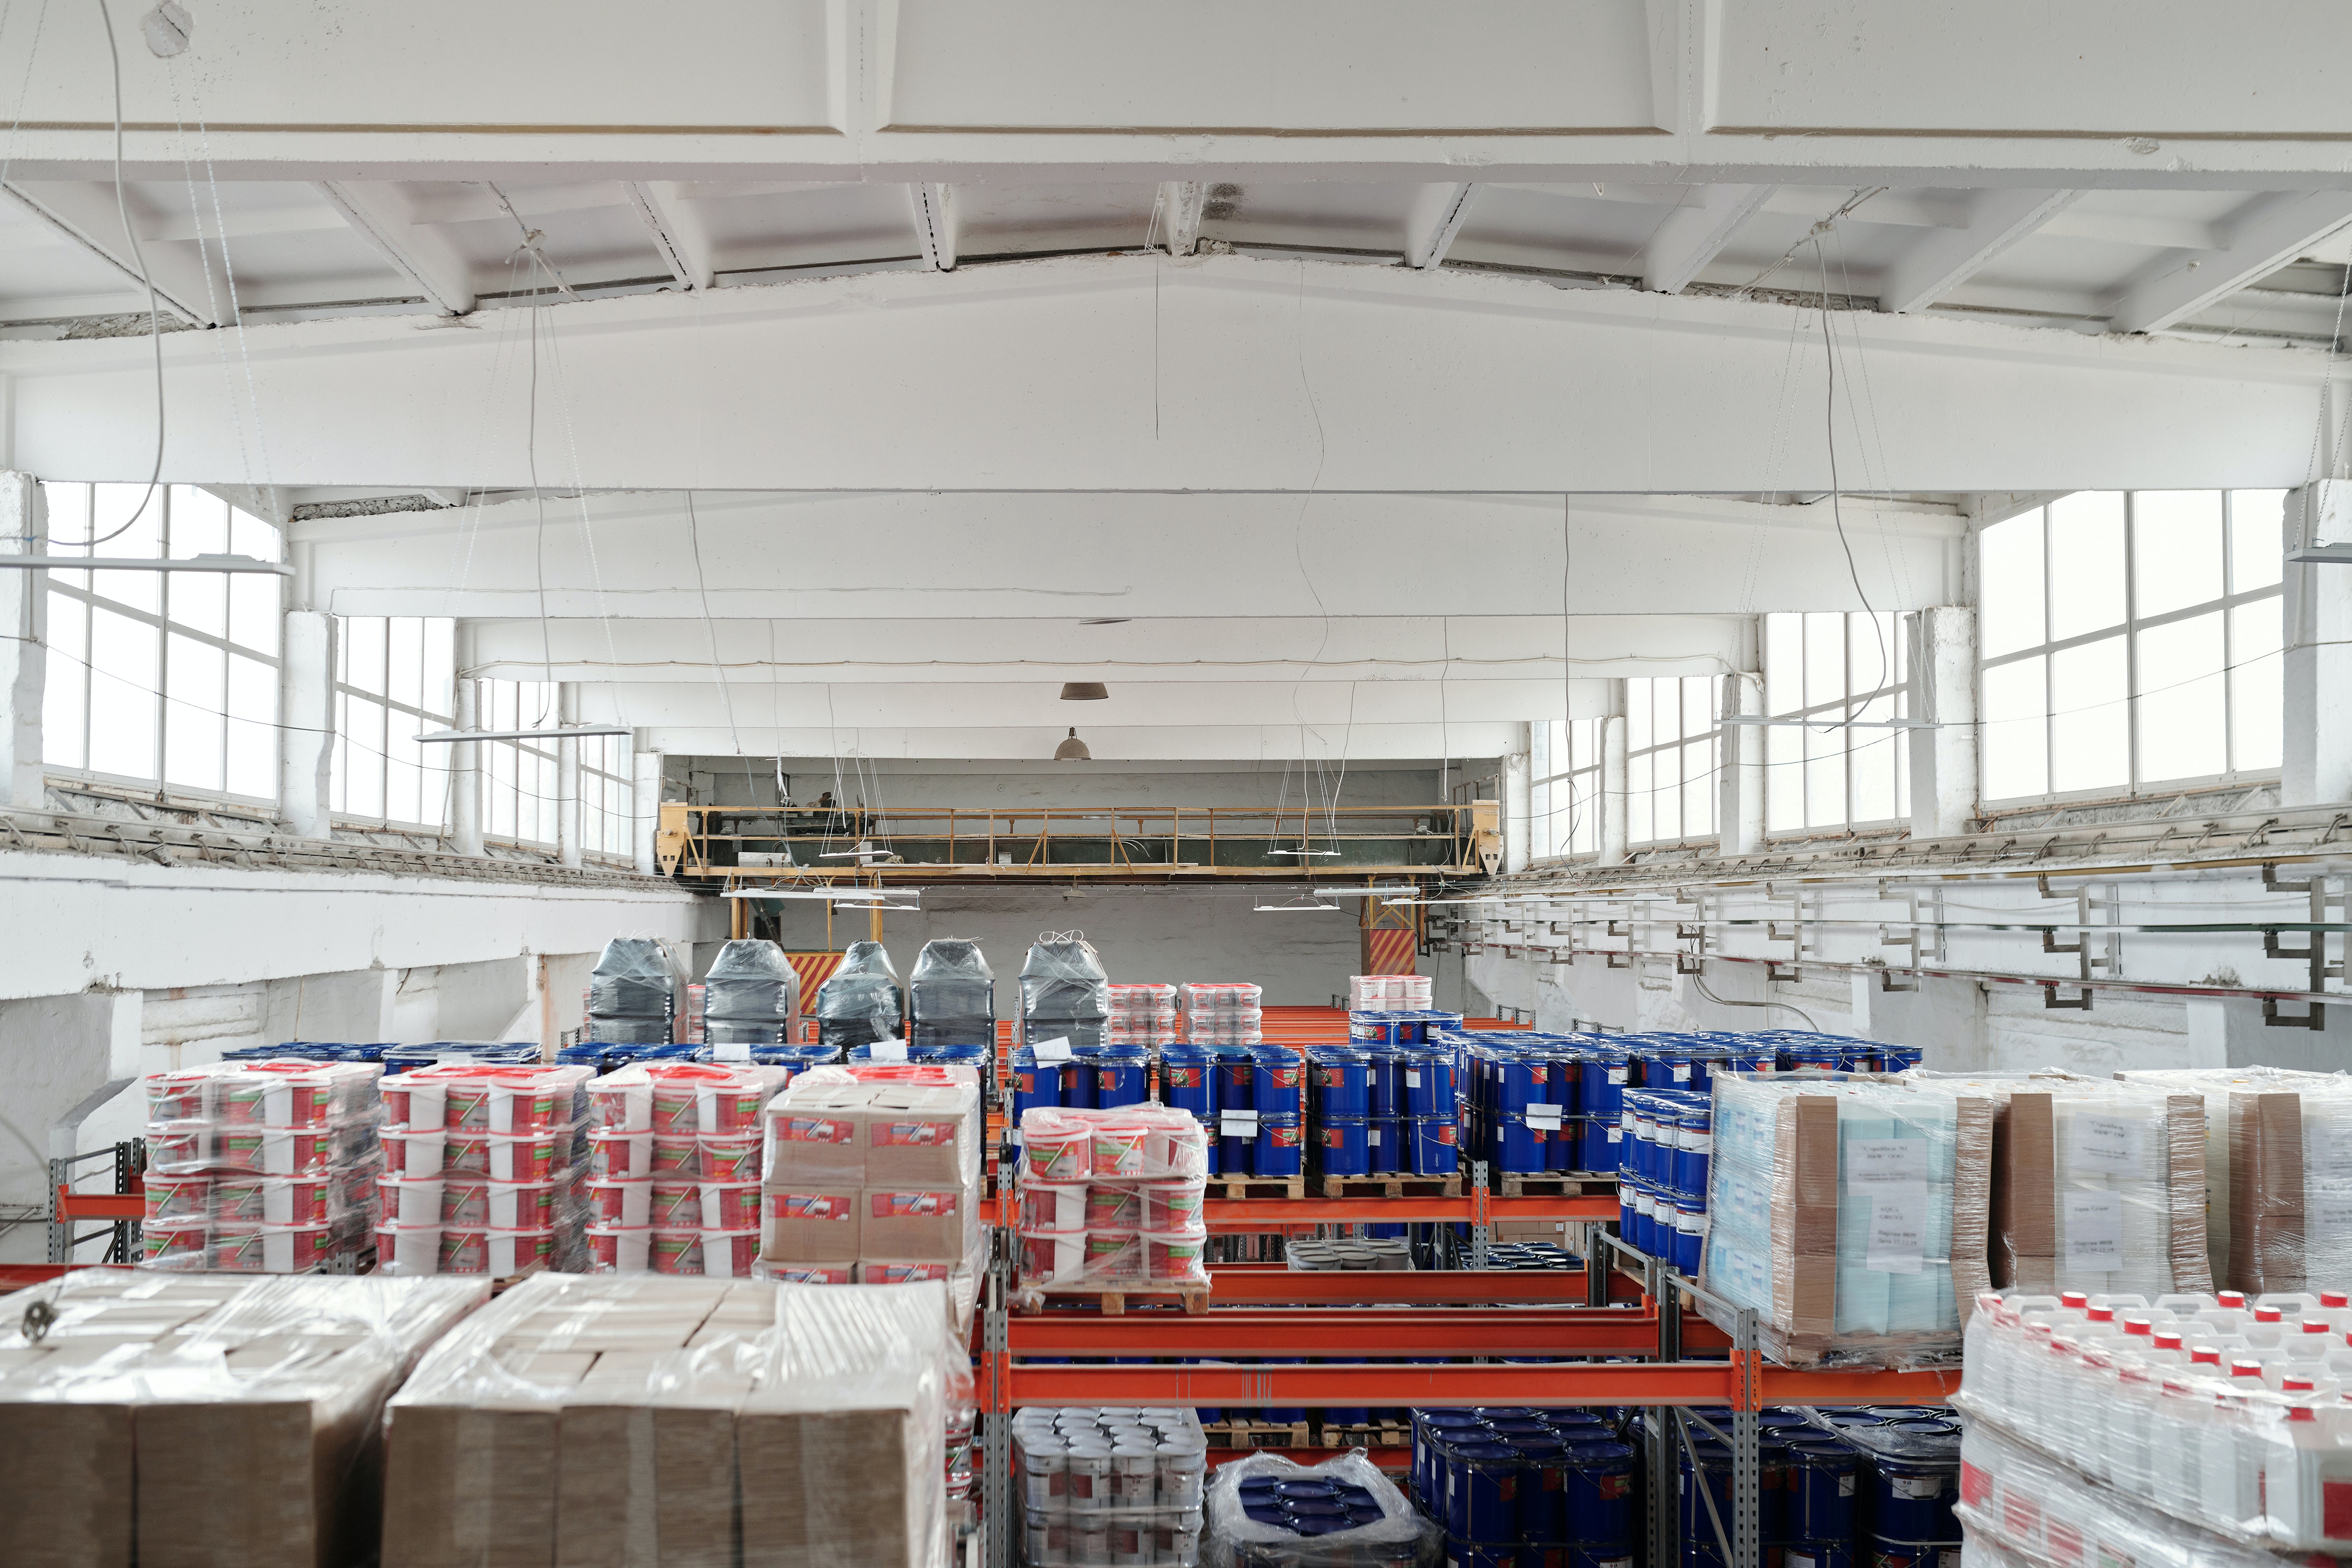 Products packed on pallets in warehouse